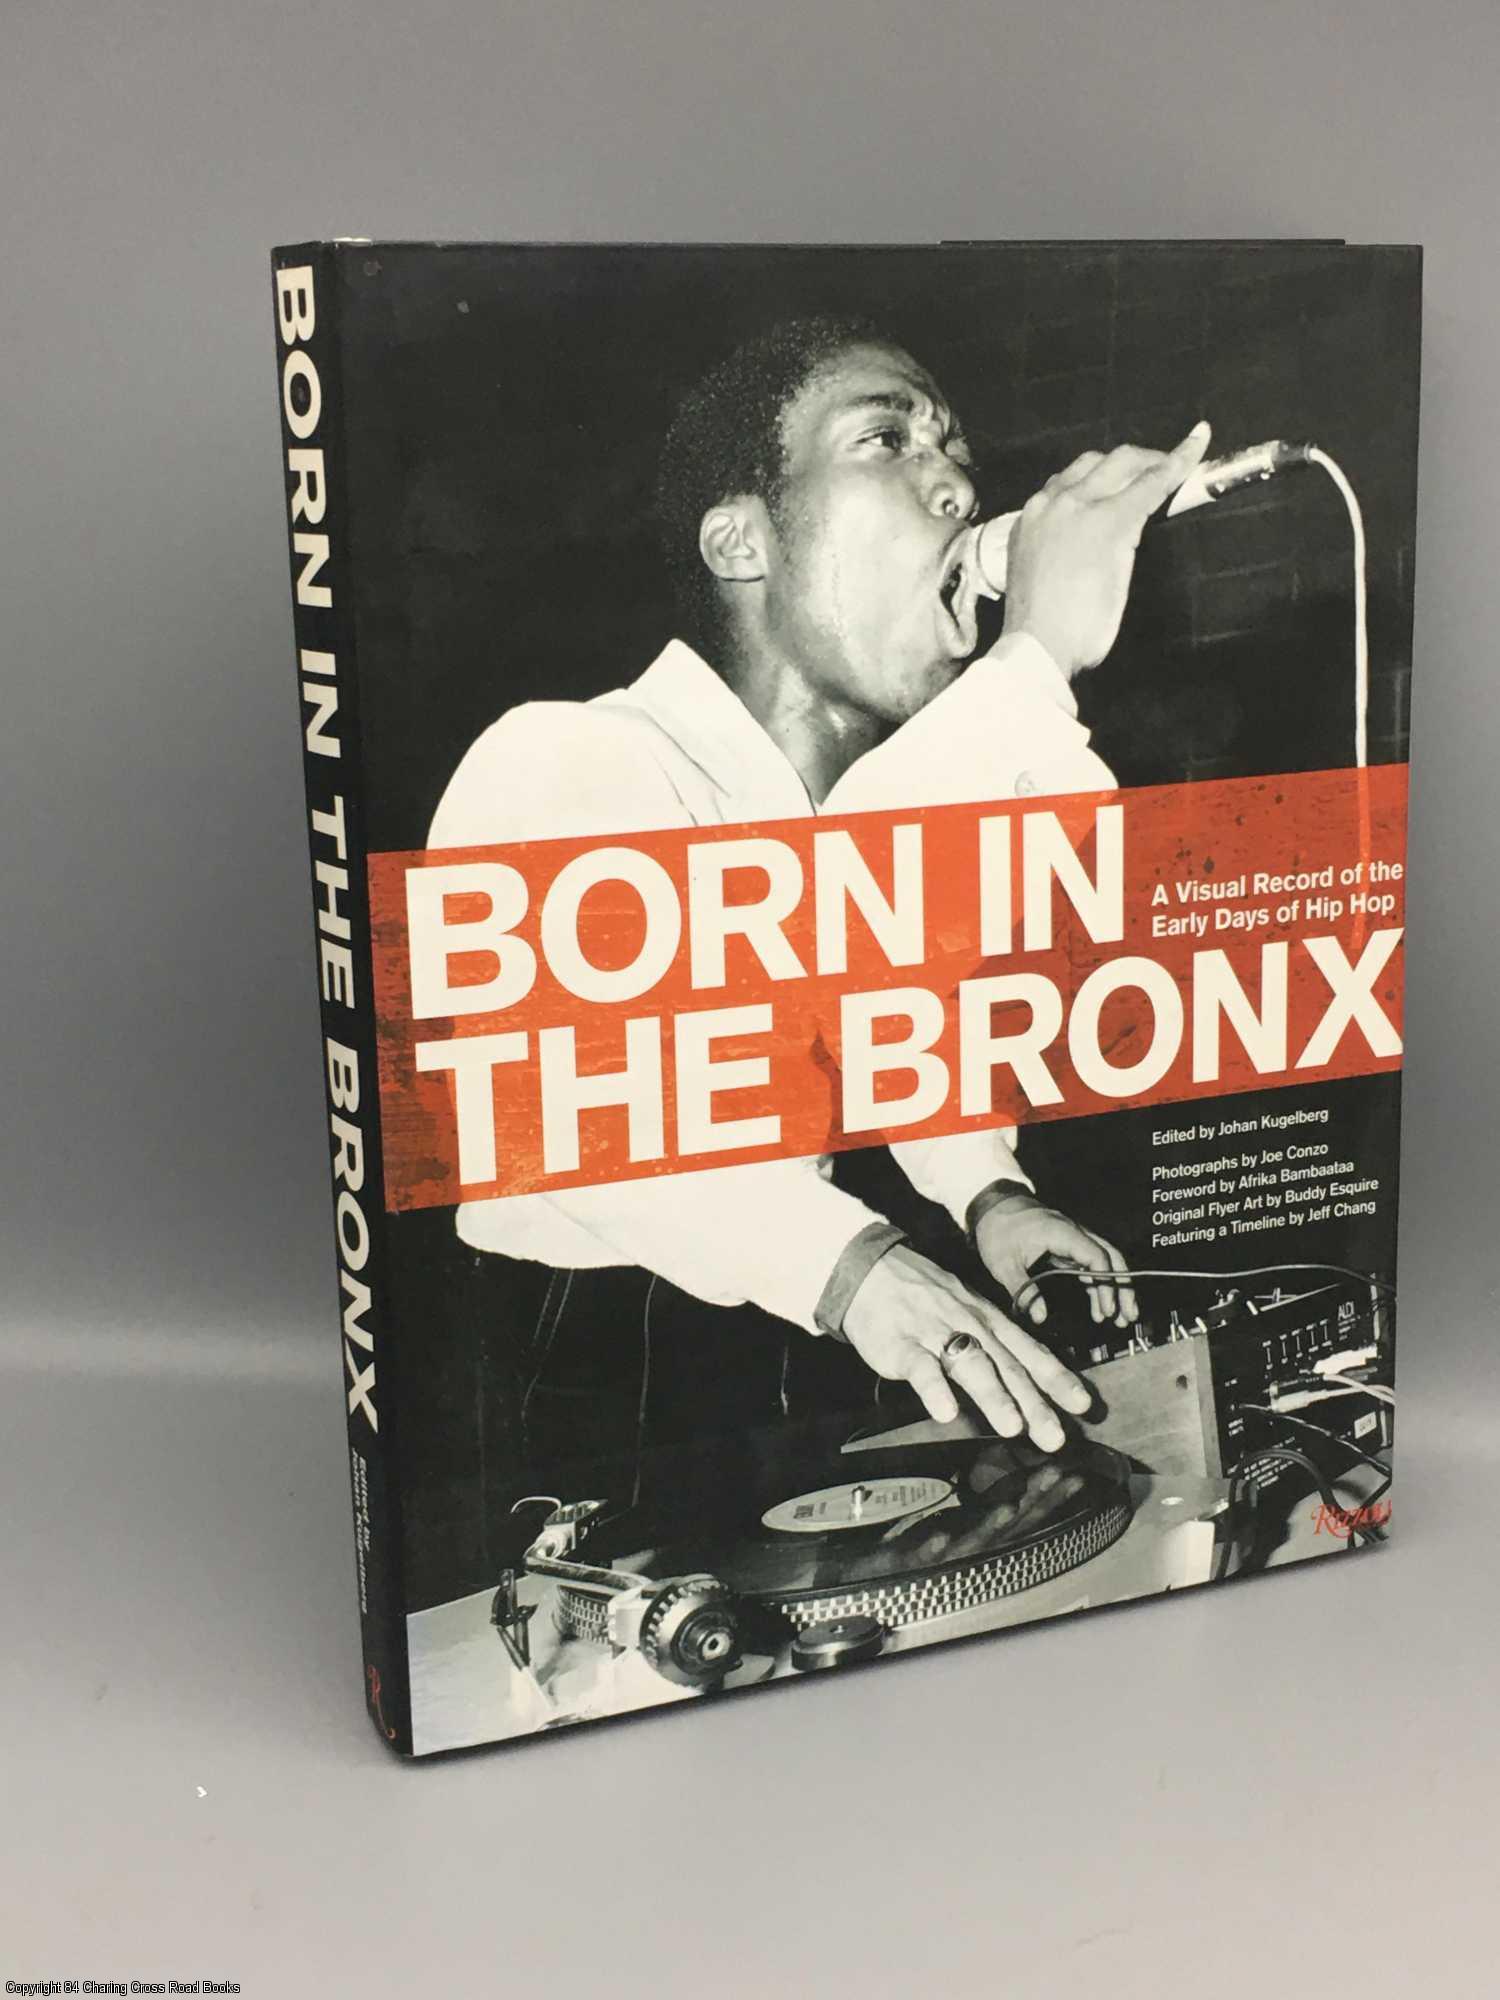 Born in the Bronx: a visual record of the early days of hip hop by Yohan  Kugelberg on 84 Charing Cross Rare Books